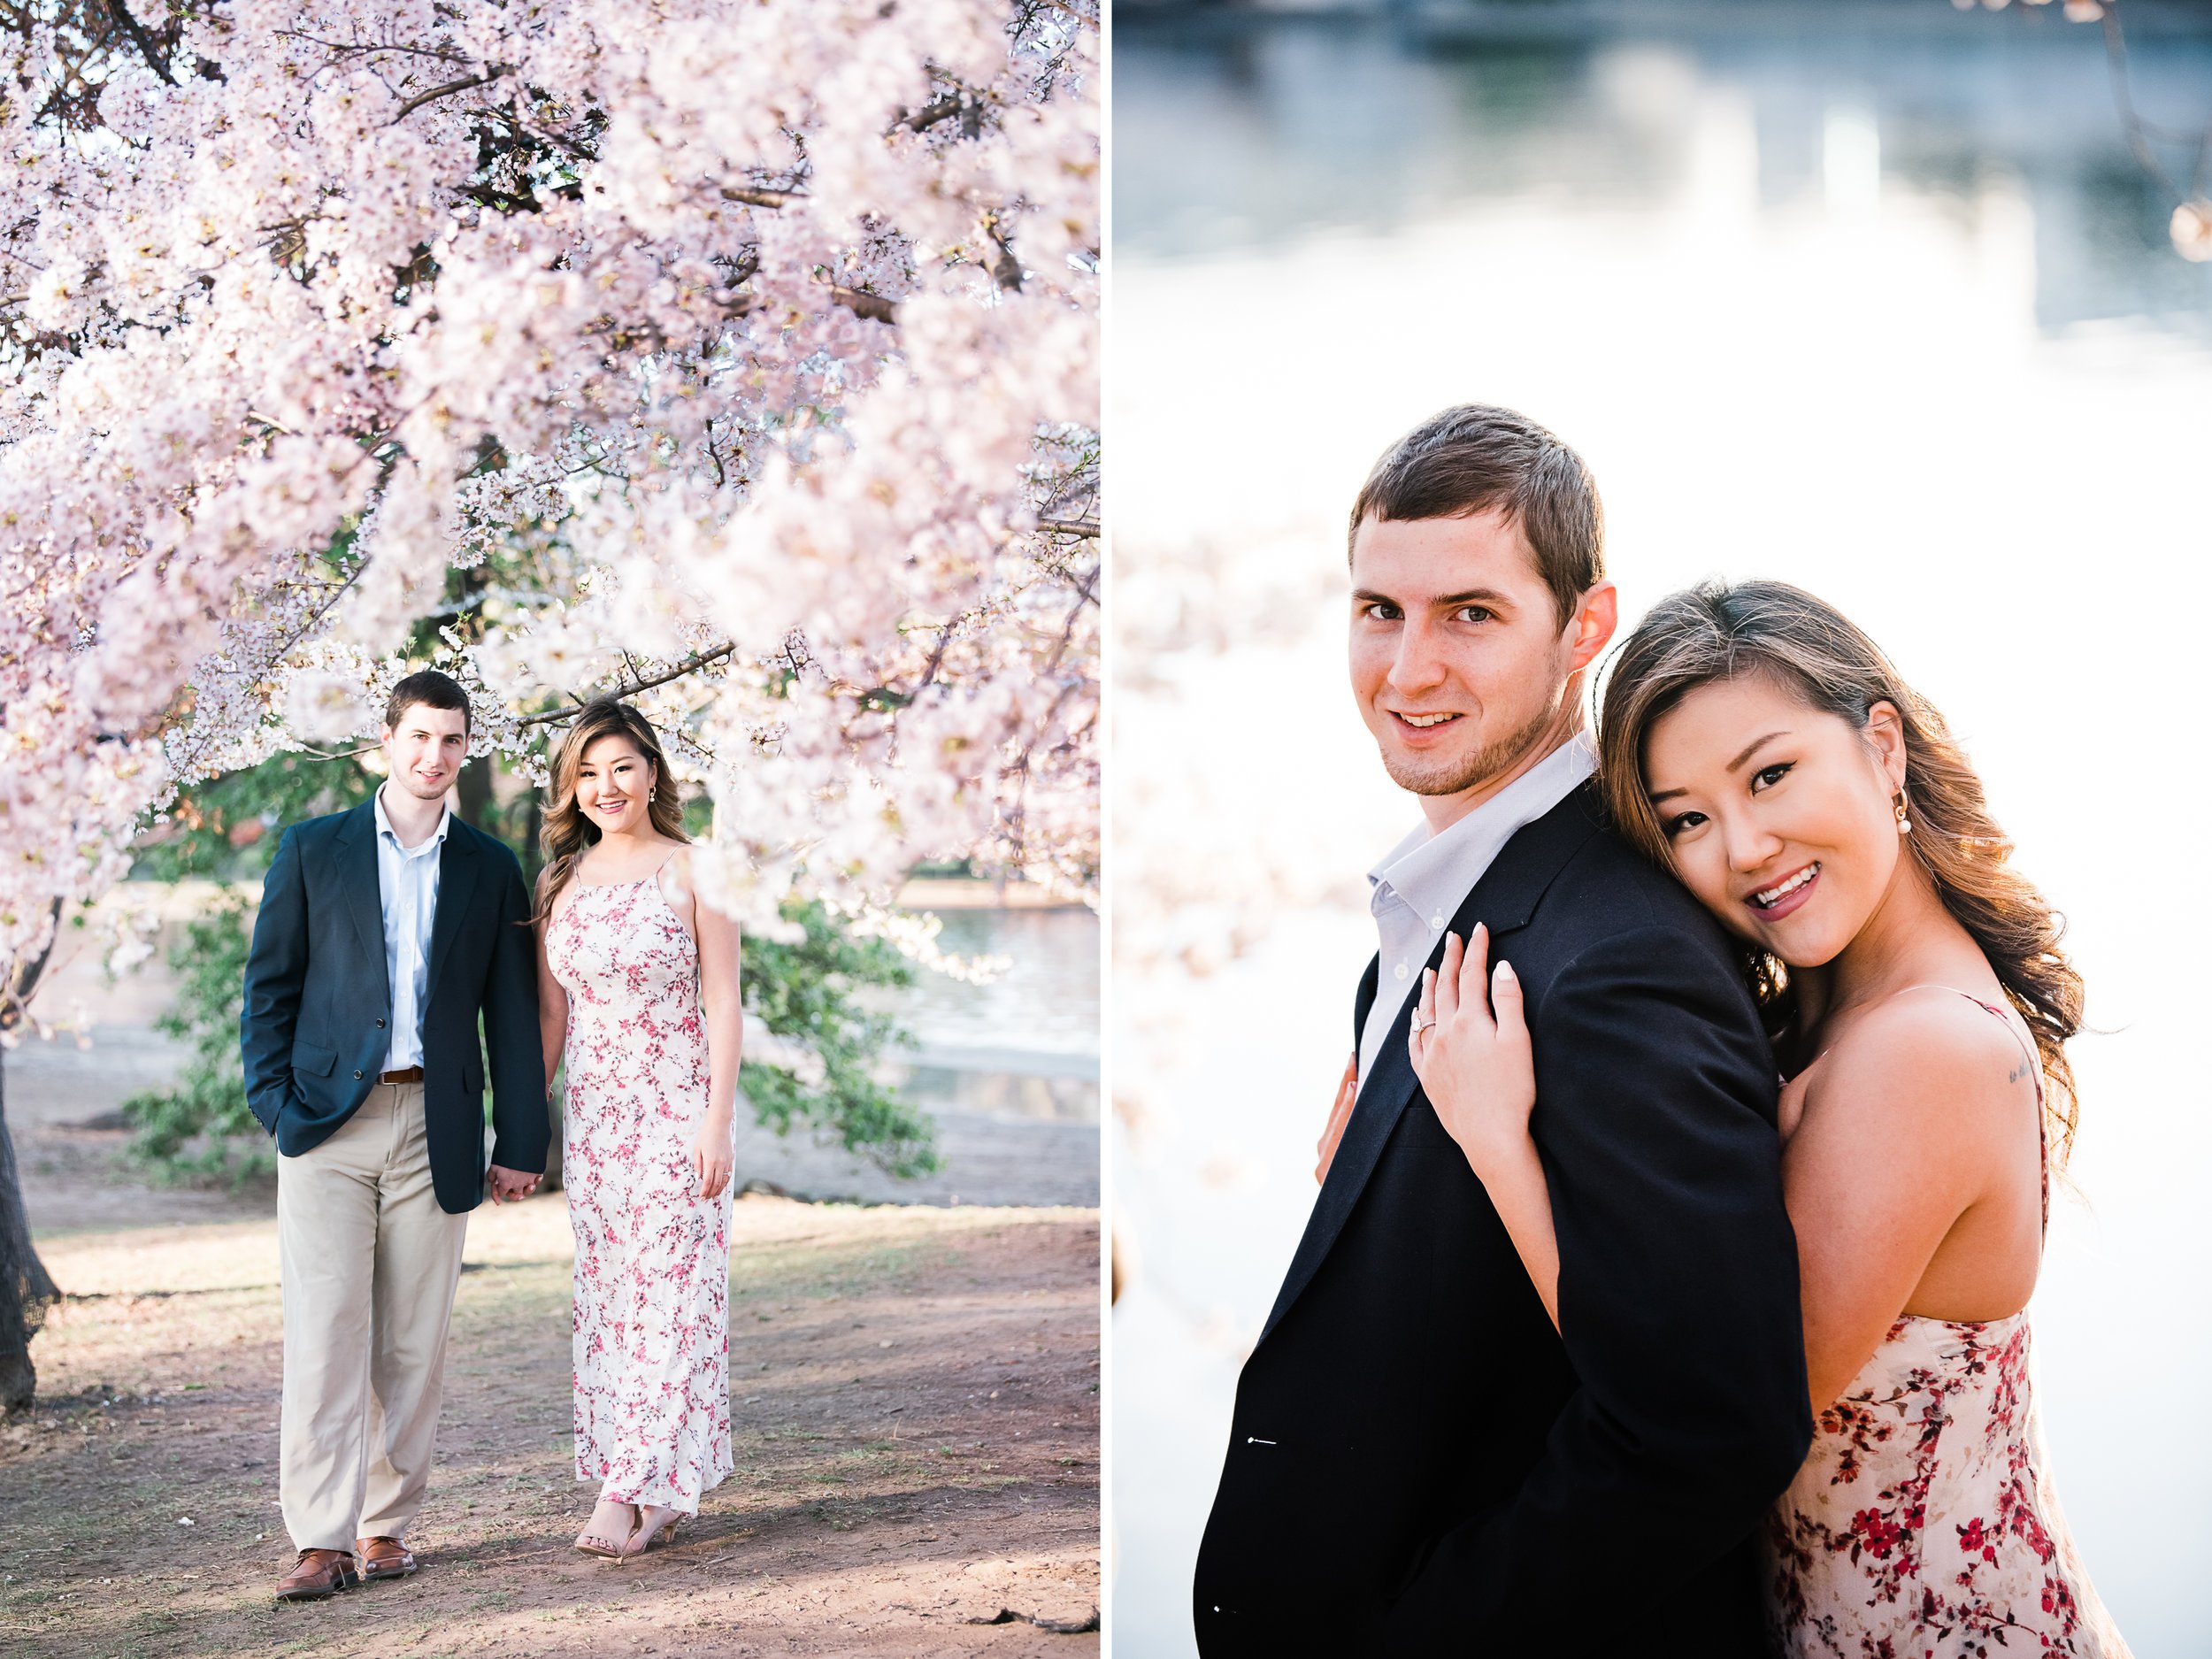 Couple photos at cherry blossoms in DC